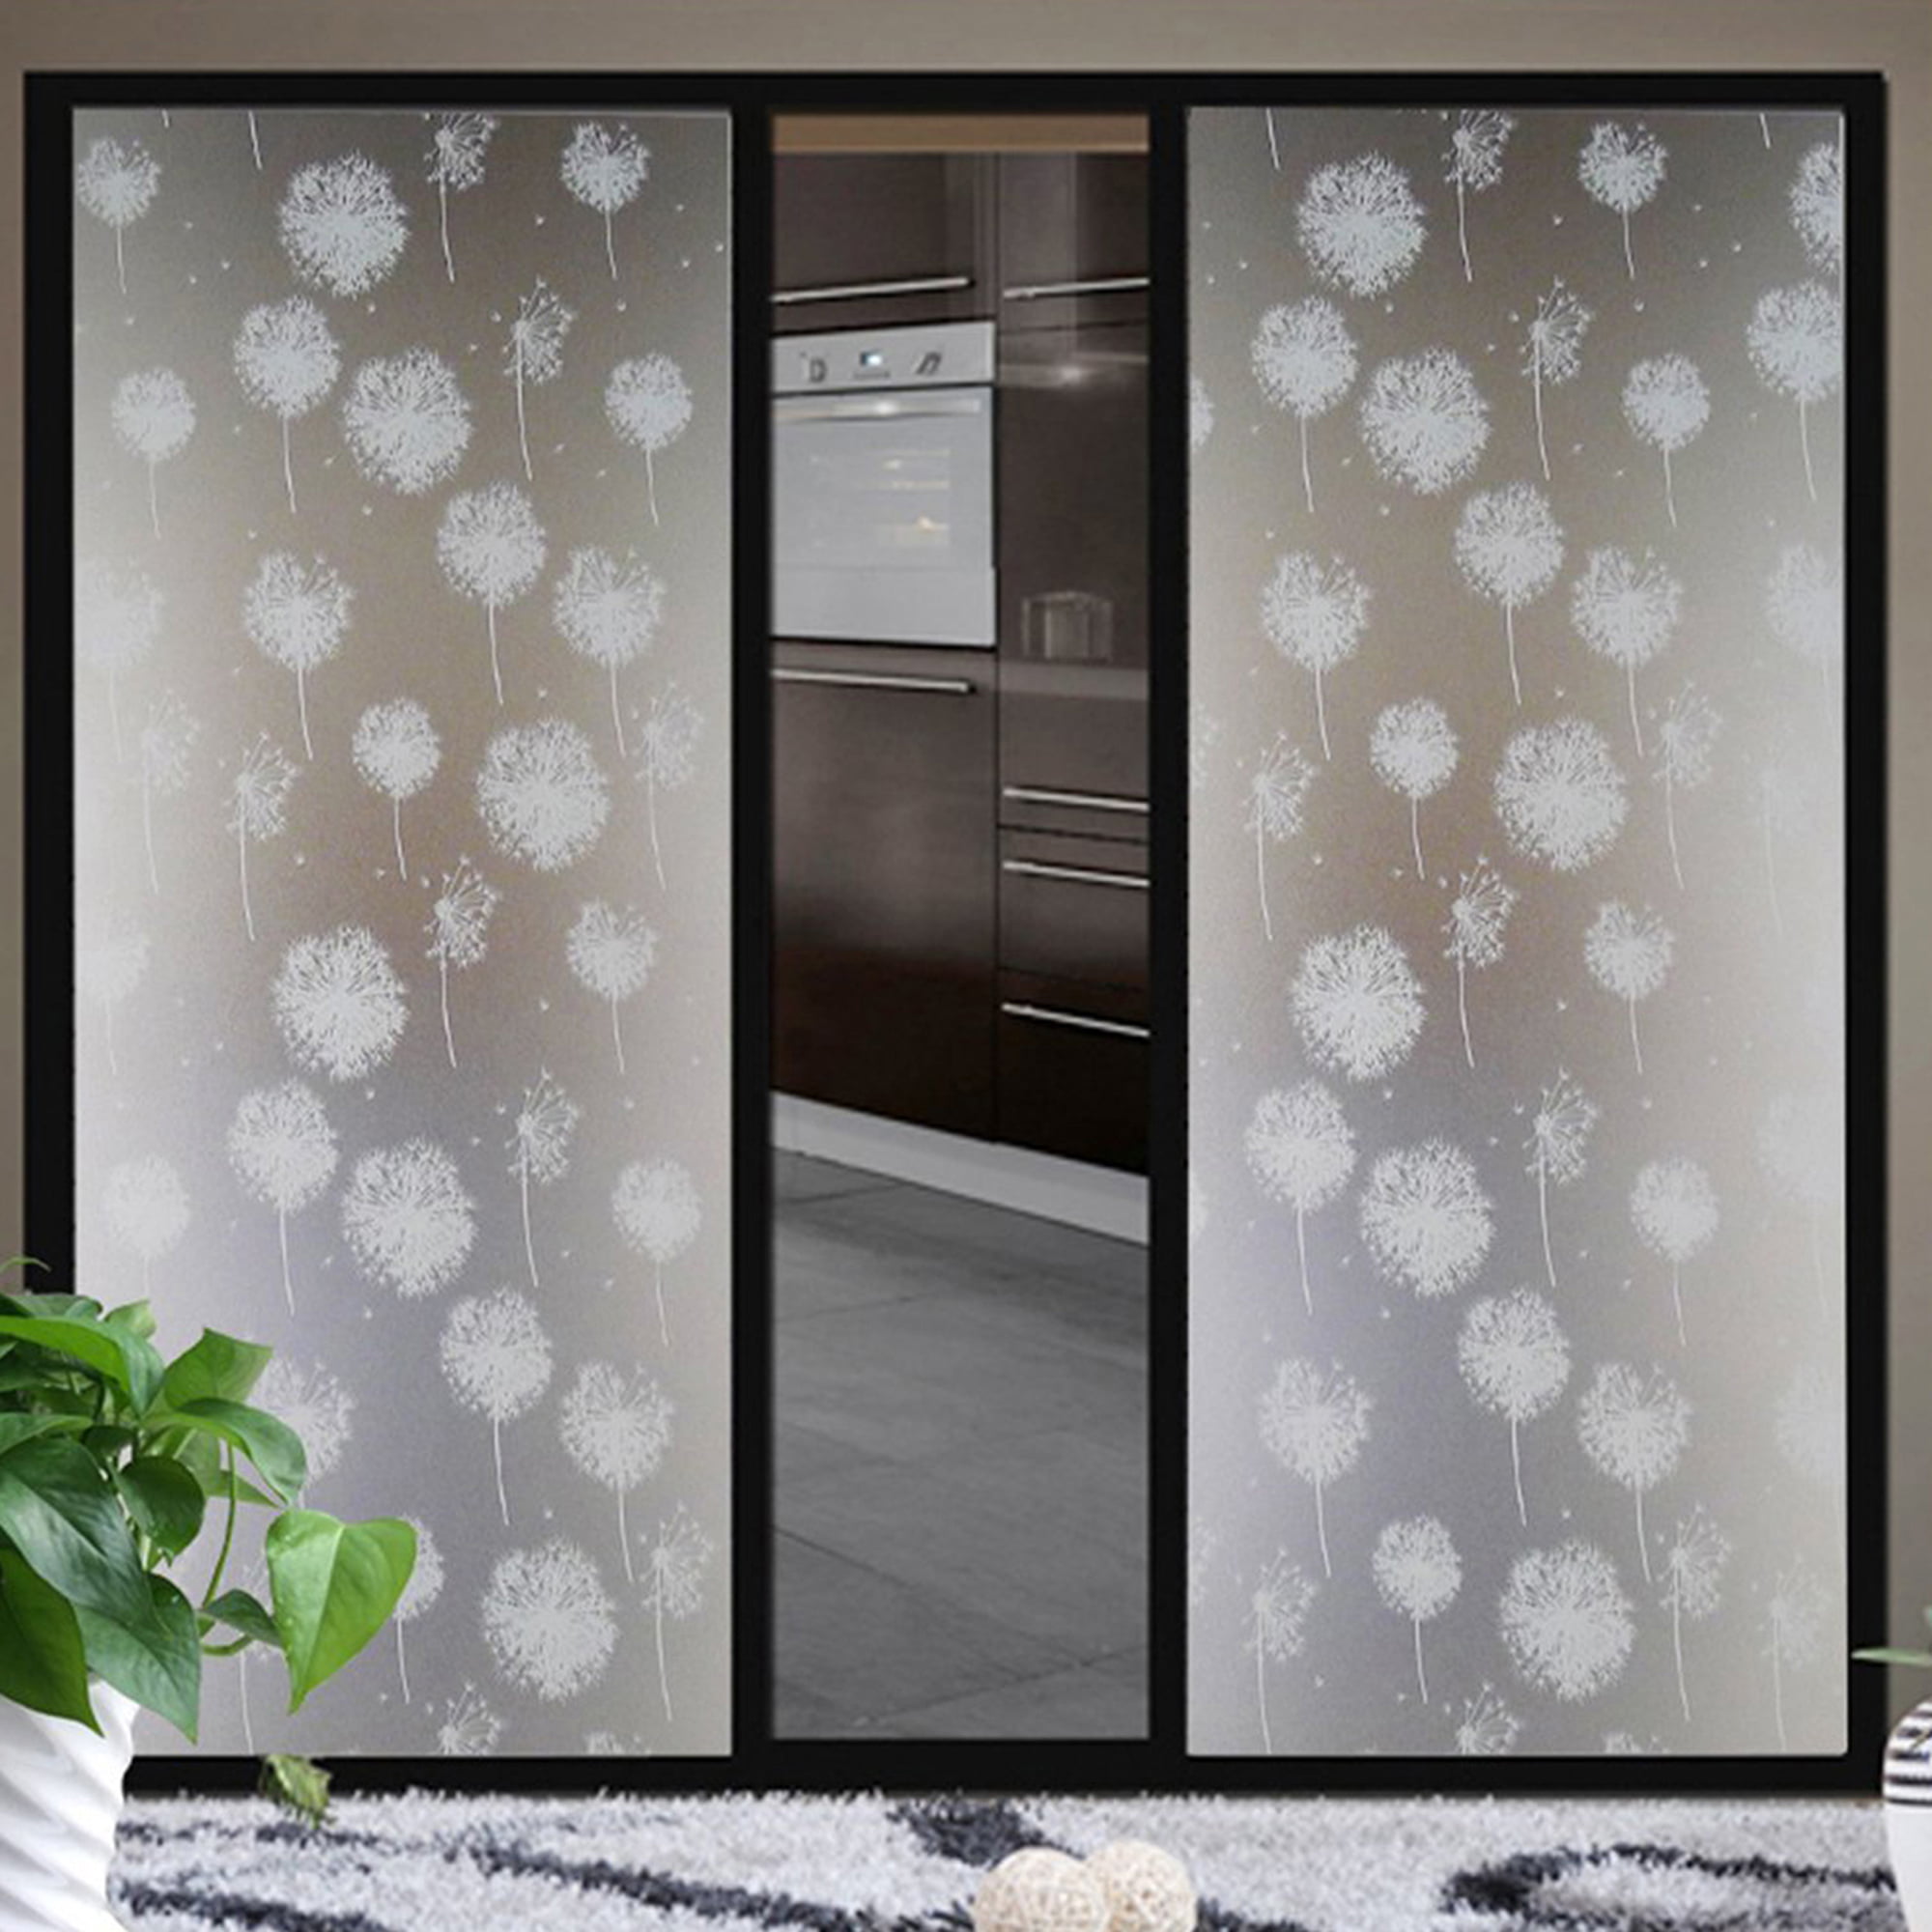 Waterproof Glass Frosted Bathroom window Privacy Self Adhesive Film Sticker US